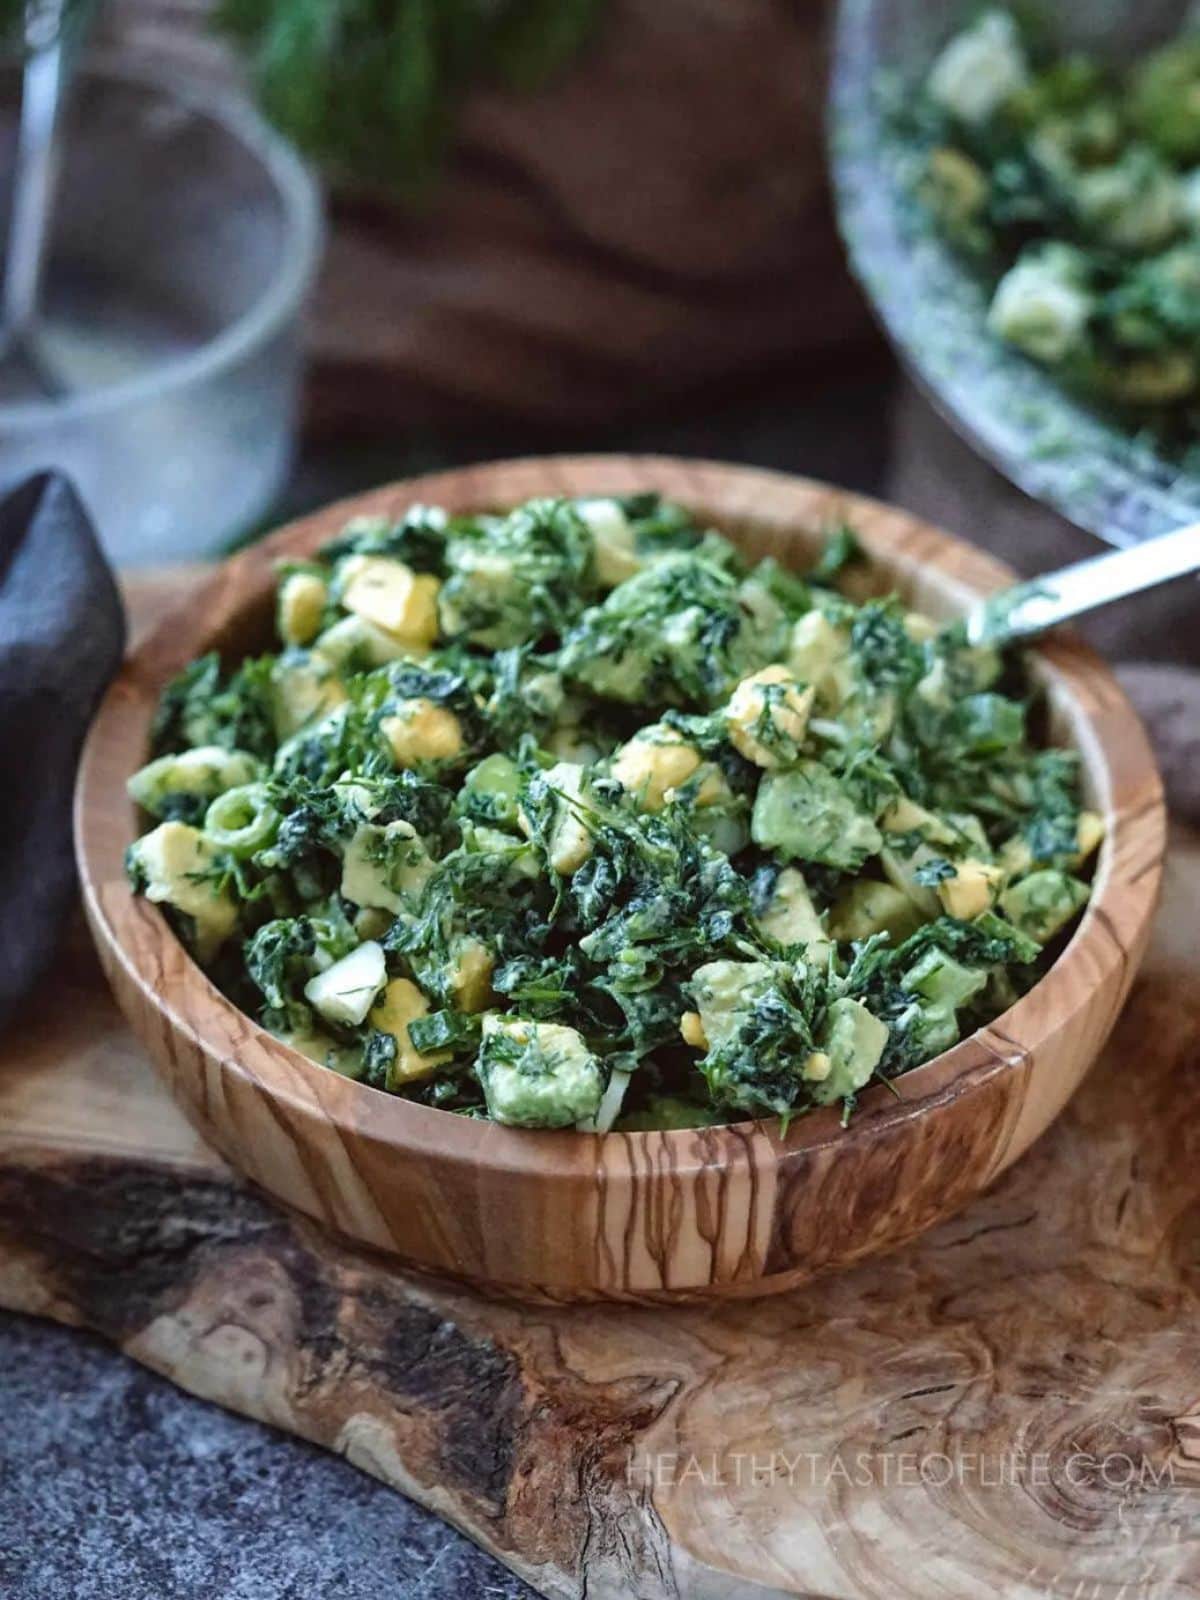 Avocado kale salad with egg in a wooden salad bowl and a spoon